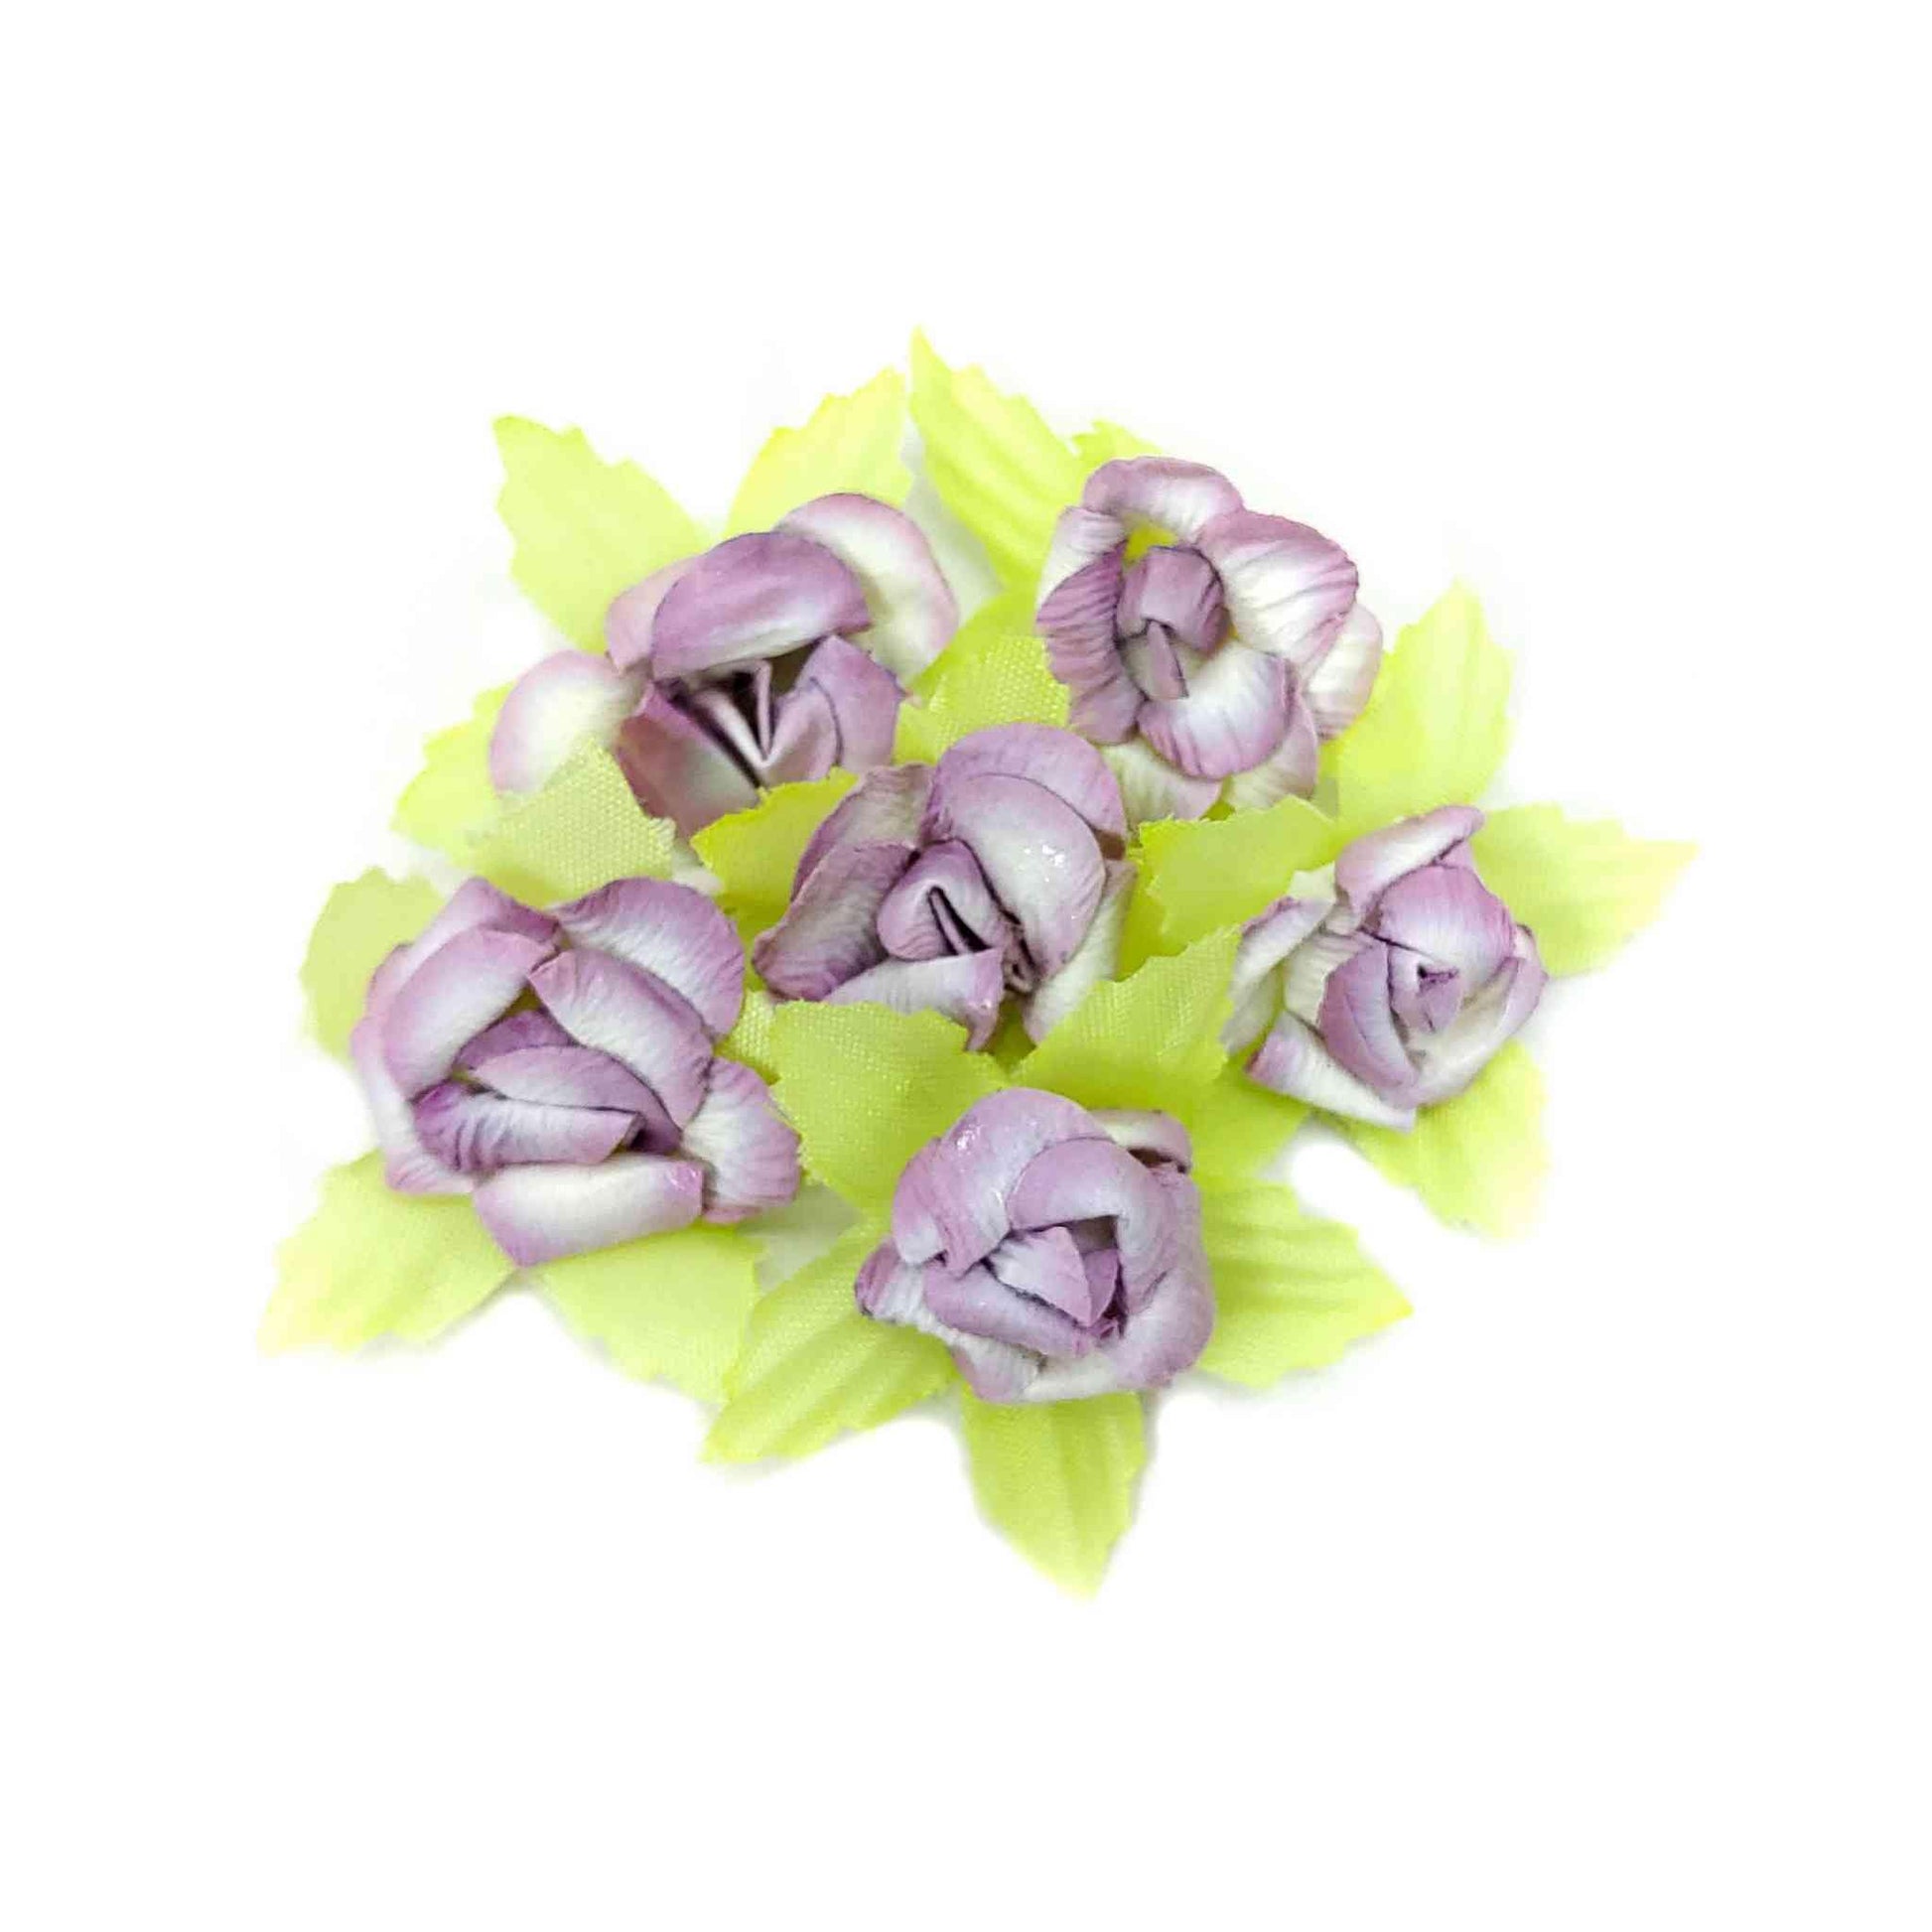 Indian Petals Beautiful Small Paper Flowers with Leaf for DIY Craft, Trouseau Packing or Decoration (Bunch of 12) - Design 30, Light Purple - Indian Petals